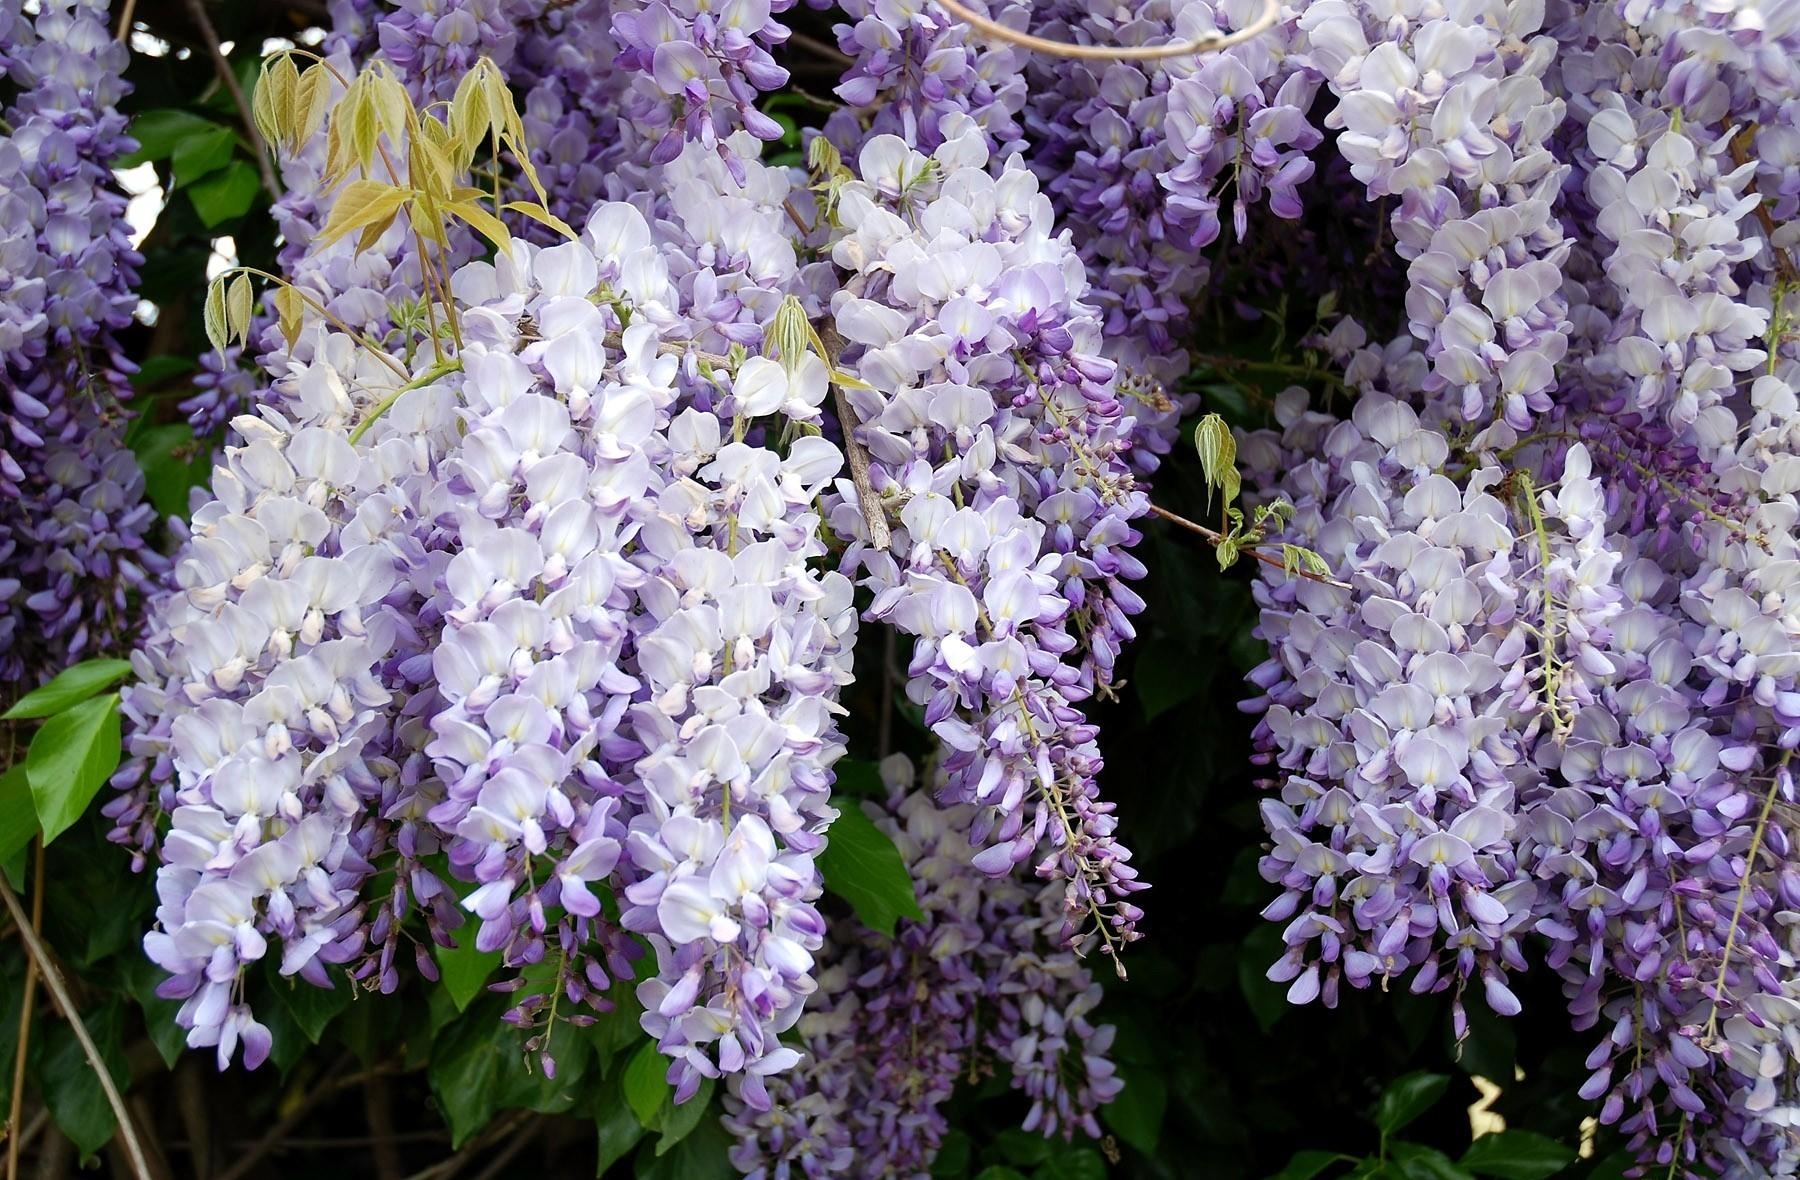 151844 download wallpaper flowers, leaves, grapes, branches, bunches, wisteria screensavers and pictures for free